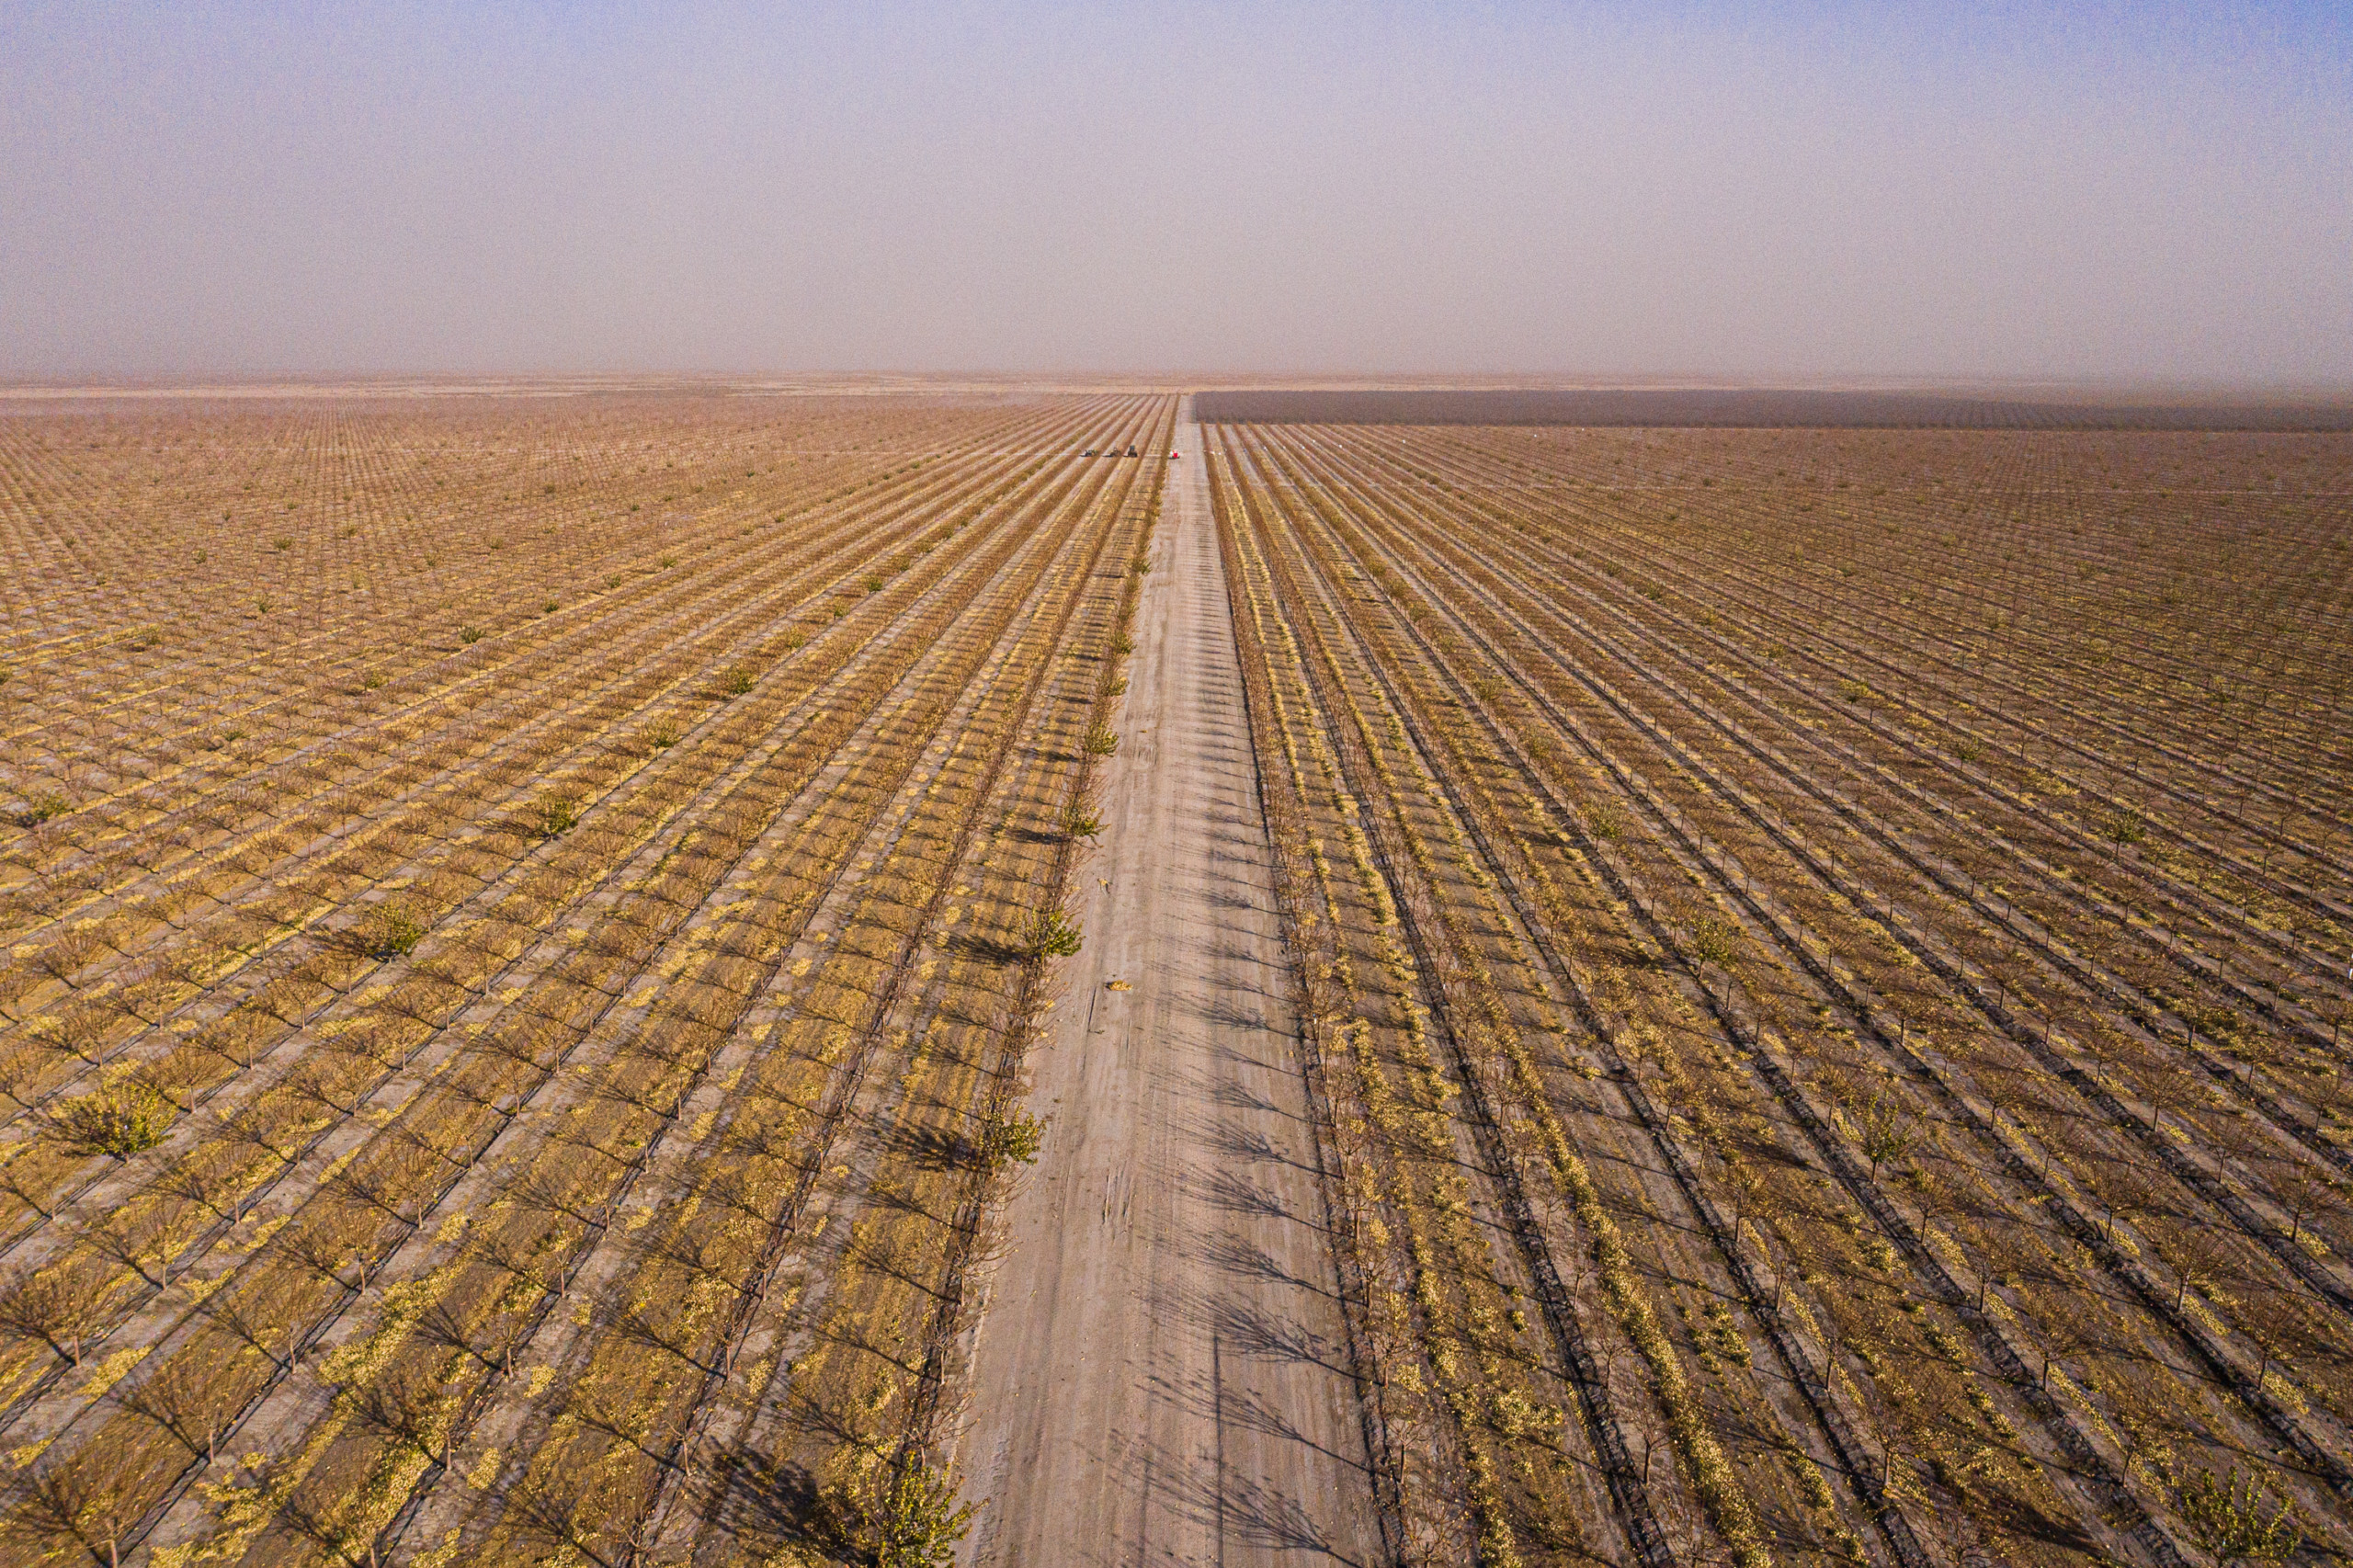 A dust store over pistachio groves just east of Firebaugh, California